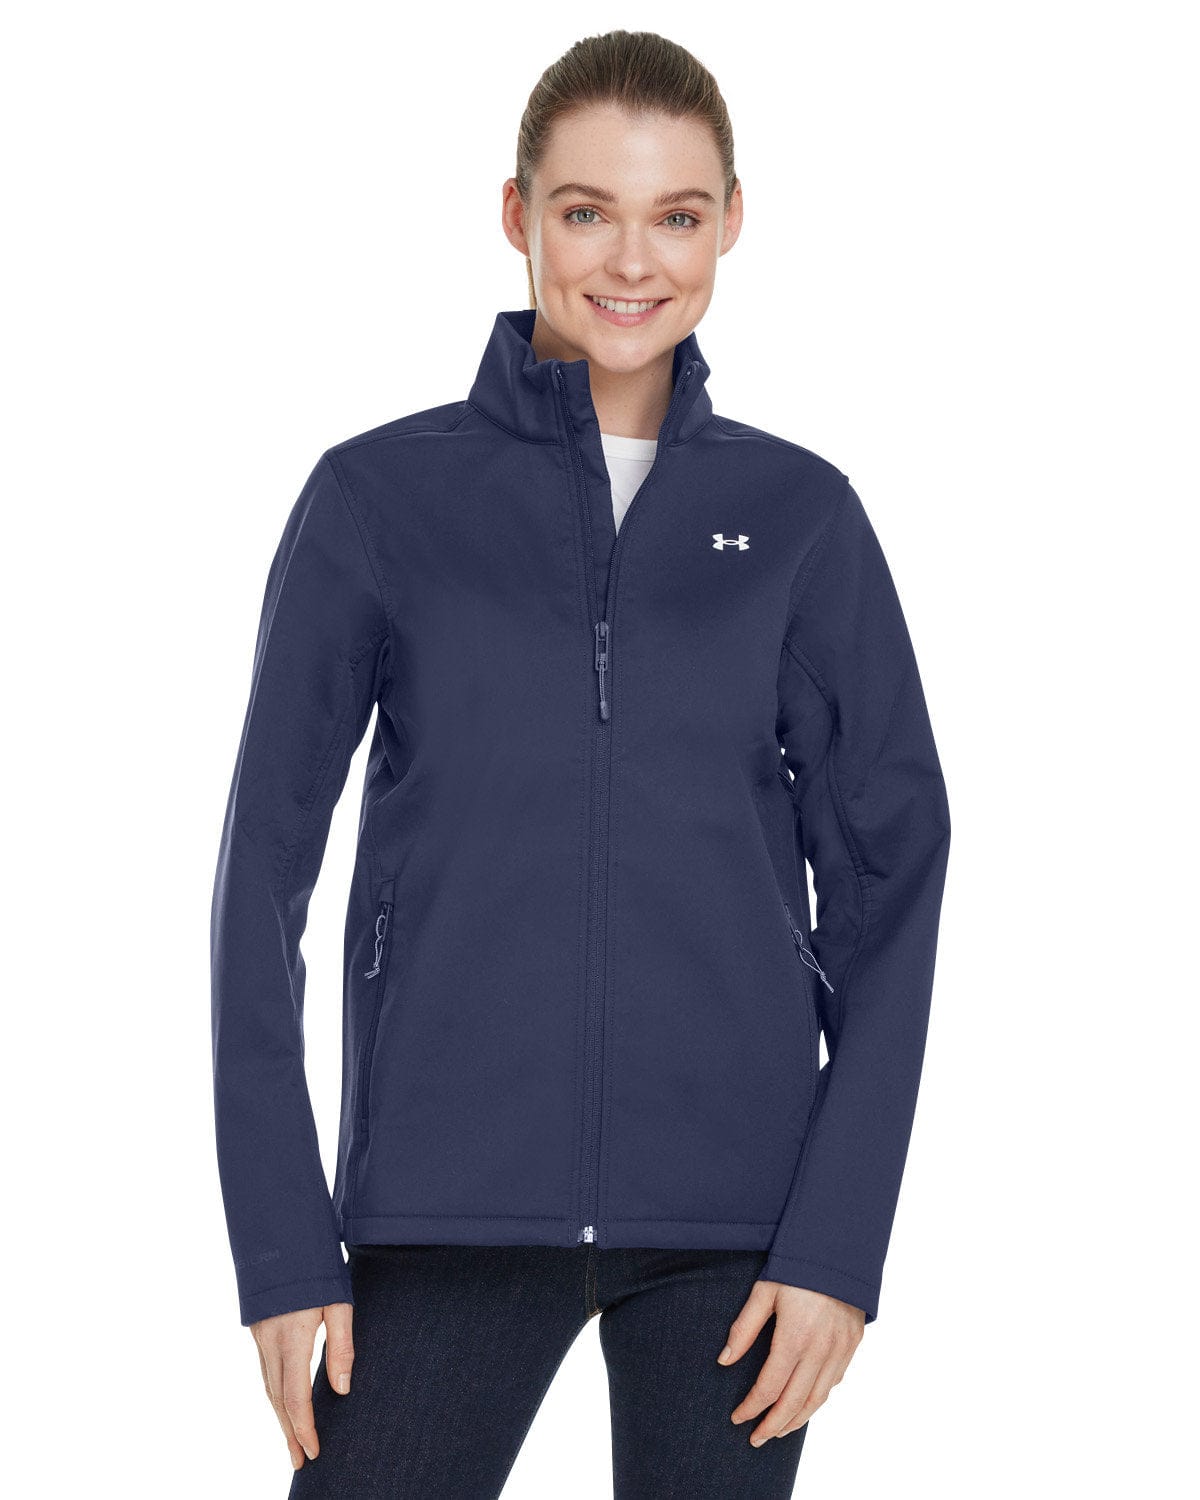  Under Armour womens ColdGear Infrared Shield 2.0 Soft Shell,  (410) Midnight Navy / / White, X-Small : Clothing, Shoes & Jewelry